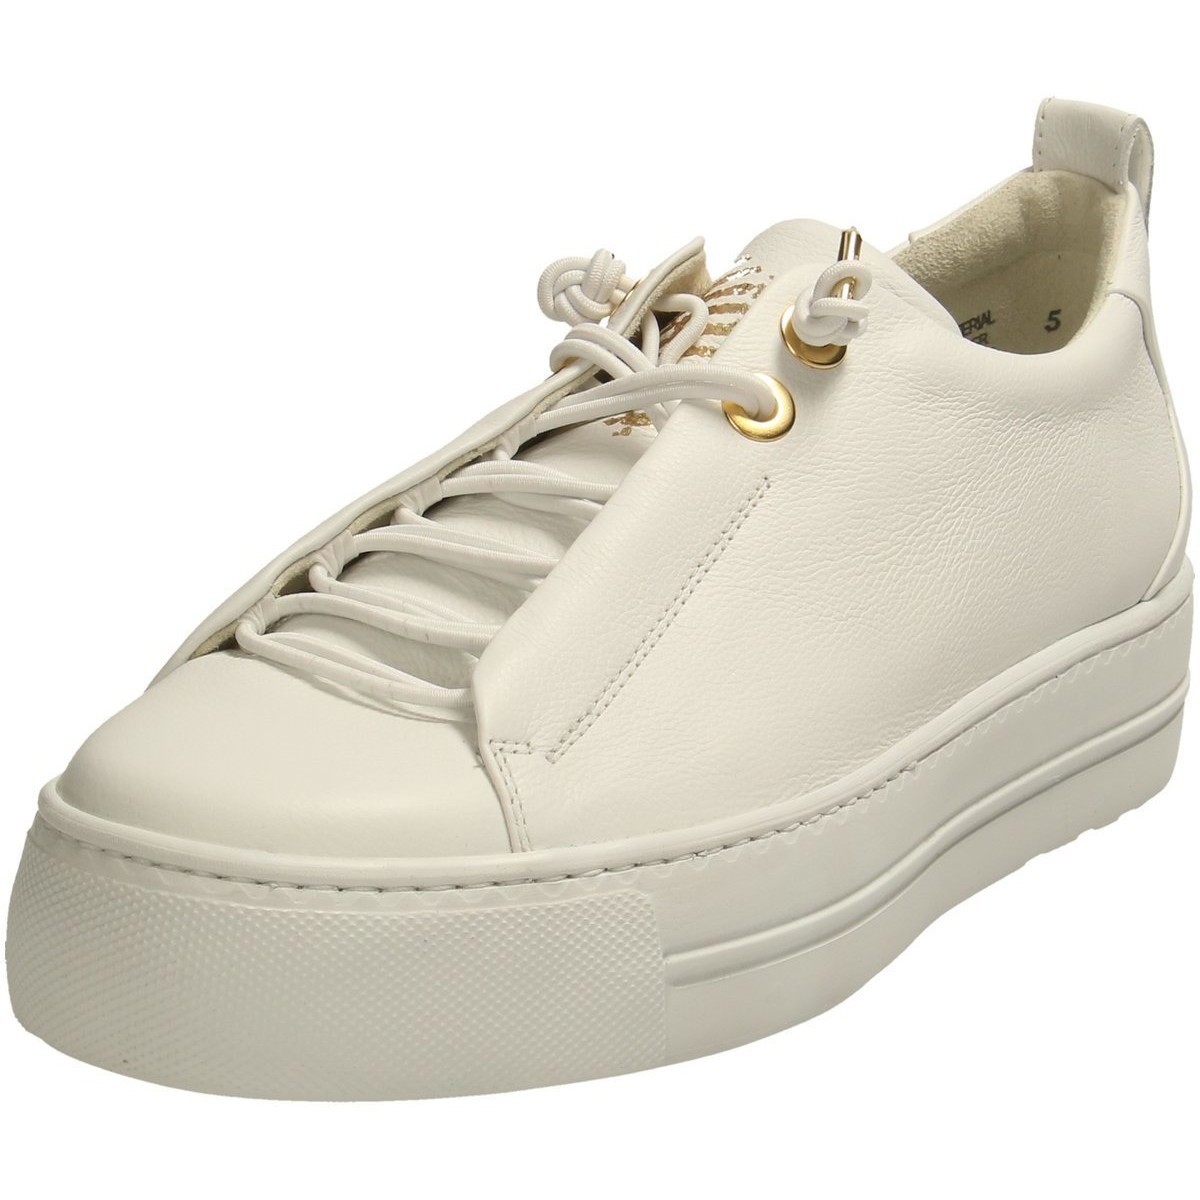 Chaussures Femme Guide des tailles  Blanc